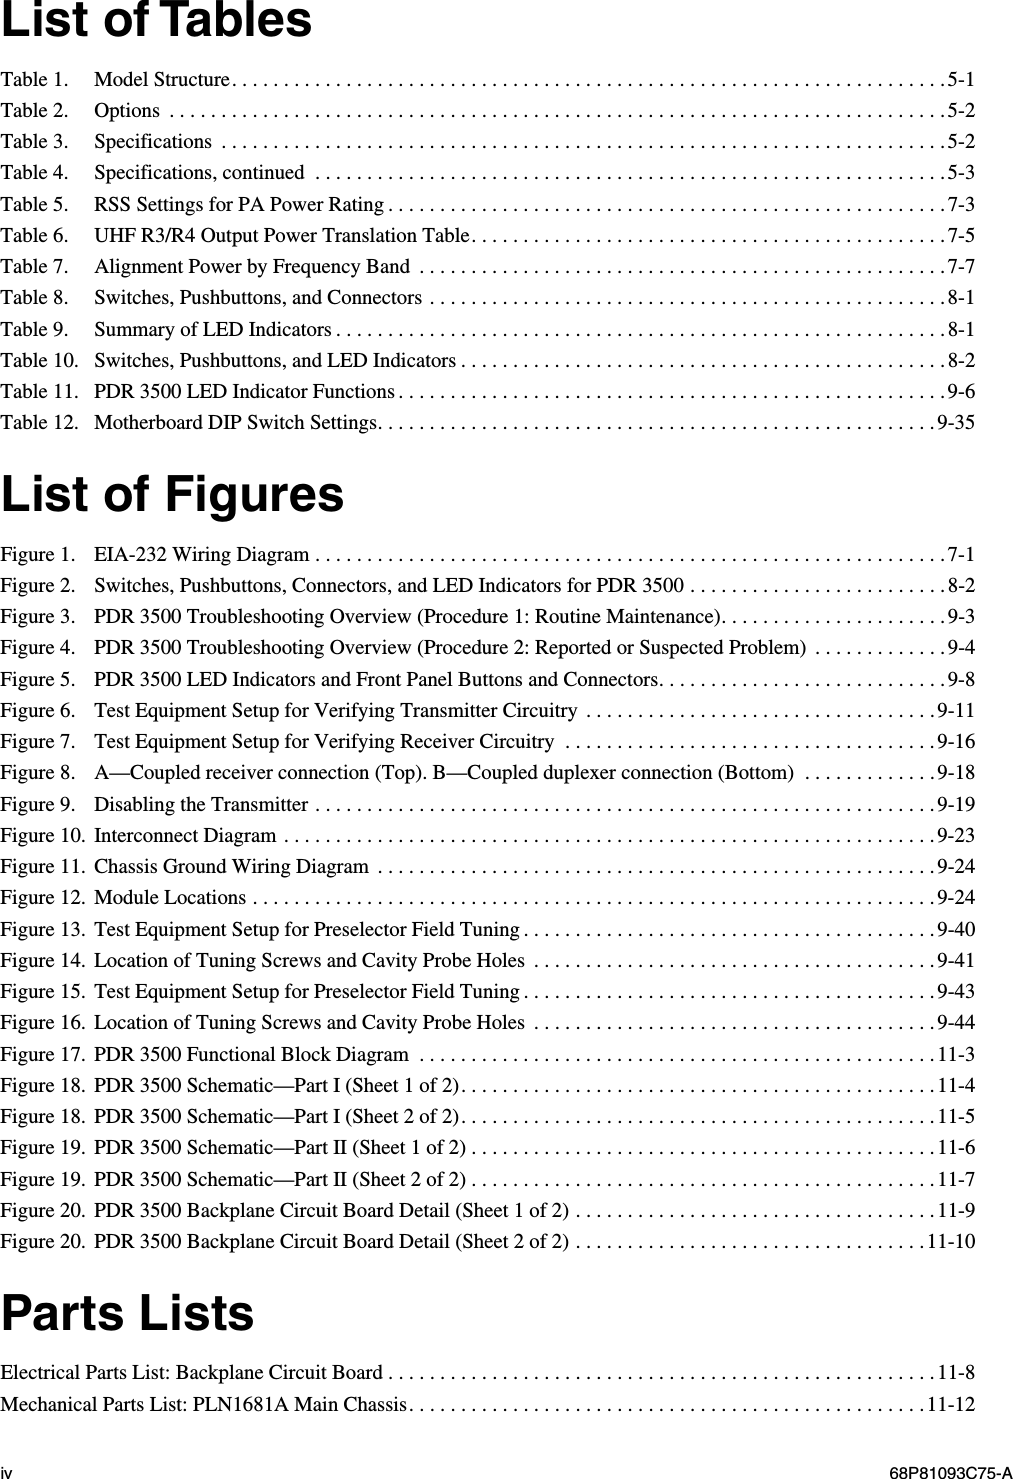  iv 68P81093C75-A List of Tables Table 1. Model Structure. . . . . . . . . . . . . . . . . . . . . . . . . . . . . . . . . . . . . . . . . . . . . . . . . . . . . . . . . . . . . . . . . . . . .5-1Table 2. Options  . . . . . . . . . . . . . . . . . . . . . . . . . . . . . . . . . . . . . . . . . . . . . . . . . . . . . . . . . . . . . . . . . . . . . . . . . . .5-2Table 3. Specifications  . . . . . . . . . . . . . . . . . . . . . . . . . . . . . . . . . . . . . . . . . . . . . . . . . . . . . . . . . . . . . . . . . . . . . .5-2Table 4. Specifications, continued  . . . . . . . . . . . . . . . . . . . . . . . . . . . . . . . . . . . . . . . . . . . . . . . . . . . . . . . . . . . . .5-3Table 5. RSS Settings for PA Power Rating . . . . . . . . . . . . . . . . . . . . . . . . . . . . . . . . . . . . . . . . . . . . . . . . . . . . . .7-3Table 6. UHF R3/R4 Output Power Translation Table. . . . . . . . . . . . . . . . . . . . . . . . . . . . . . . . . . . . . . . . . . . . . .7-5Table 7. Alignment Power by Frequency Band  . . . . . . . . . . . . . . . . . . . . . . . . . . . . . . . . . . . . . . . . . . . . . . . . . . .7-7Table 8. Switches, Pushbuttons, and Connectors . . . . . . . . . . . . . . . . . . . . . . . . . . . . . . . . . . . . . . . . . . . . . . . . . .8-1Table 9. Summary of LED Indicators . . . . . . . . . . . . . . . . . . . . . . . . . . . . . . . . . . . . . . . . . . . . . . . . . . . . . . . . . . .8-1Table 10. Switches, Pushbuttons, and LED Indicators . . . . . . . . . . . . . . . . . . . . . . . . . . . . . . . . . . . . . . . . . . . . . . .8-2Table 11. PDR 3500 LED Indicator Functions . . . . . . . . . . . . . . . . . . . . . . . . . . . . . . . . . . . . . . . . . . . . . . . . . . . . .9-6Table 12. Motherboard DIP Switch Settings. . . . . . . . . . . . . . . . . . . . . . . . . . . . . . . . . . . . . . . . . . . . . . . . . . . . . .9-35 List of Figures Figure 1. EIA-232 Wiring Diagram . . . . . . . . . . . . . . . . . . . . . . . . . . . . . . . . . . . . . . . . . . . . . . . . . . . . . . . . . . . . .7-1Figure 2. Switches, Pushbuttons, Connectors, and LED Indicators for PDR 3500 . . . . . . . . . . . . . . . . . . . . . . . . .8-2Figure 3. PDR 3500 Troubleshooting Overview (Procedure 1: Routine Maintenance). . . . . . . . . . . . . . . . . . . . . .9-3Figure 4. PDR 3500 Troubleshooting Overview (Procedure 2: Reported or Suspected Problem)  . . . . . . . . . . . . .9-4Figure 5. PDR 3500 LED Indicators and Front Panel Buttons and Connectors. . . . . . . . . . . . . . . . . . . . . . . . . . . . 9-8Figure 6. Test Equipment Setup for Verifying Transmitter Circuitry . . . . . . . . . . . . . . . . . . . . . . . . . . . . . . . . . . 9-11Figure 7. Test Equipment Setup for Verifying Receiver Circuitry  . . . . . . . . . . . . . . . . . . . . . . . . . . . . . . . . . . . .9-16Figure 8. A—Coupled receiver connection (Top). B—Coupled duplexer connection (Bottom)  . . . . . . . . . . . . .9-18Figure 9. Disabling the Transmitter . . . . . . . . . . . . . . . . . . . . . . . . . . . . . . . . . . . . . . . . . . . . . . . . . . . . . . . . . . . .9-19Figure 10. Interconnect Diagram . . . . . . . . . . . . . . . . . . . . . . . . . . . . . . . . . . . . . . . . . . . . . . . . . . . . . . . . . . . . . . .9-23Figure 11. Chassis Ground Wiring Diagram  . . . . . . . . . . . . . . . . . . . . . . . . . . . . . . . . . . . . . . . . . . . . . . . . . . . . . .9-24Figure 12. Module Locations . . . . . . . . . . . . . . . . . . . . . . . . . . . . . . . . . . . . . . . . . . . . . . . . . . . . . . . . . . . . . . . . . .9-24Figure 13. Test Equipment Setup for Preselector Field Tuning . . . . . . . . . . . . . . . . . . . . . . . . . . . . . . . . . . . . . . . .9-40Figure 14. Location of Tuning Screws and Cavity Probe Holes  . . . . . . . . . . . . . . . . . . . . . . . . . . . . . . . . . . . . . . .9-41Figure 15. Test Equipment Setup for Preselector Field Tuning . . . . . . . . . . . . . . . . . . . . . . . . . . . . . . . . . . . . . . . .9-43Figure 16. Location of Tuning Screws and Cavity Probe Holes  . . . . . . . . . . . . . . . . . . . . . . . . . . . . . . . . . . . . . . .9-44Figure 17. PDR 3500 Functional Block Diagram  . . . . . . . . . . . . . . . . . . . . . . . . . . . . . . . . . . . . . . . . . . . . . . . . . .11-3Figure 18. PDR 3500 Schematic—Part I (Sheet 1 of 2). . . . . . . . . . . . . . . . . . . . . . . . . . . . . . . . . . . . . . . . . . . . . .11-4Figure 18. PDR 3500 Schematic—Part I (Sheet 2 of 2). . . . . . . . . . . . . . . . . . . . . . . . . . . . . . . . . . . . . . . . . . . . . .11-5Figure 19. PDR 3500 Schematic—Part II (Sheet 1 of 2) . . . . . . . . . . . . . . . . . . . . . . . . . . . . . . . . . . . . . . . . . . . . .11-6Figure 19. PDR 3500 Schematic—Part II (Sheet 2 of 2) . . . . . . . . . . . . . . . . . . . . . . . . . . . . . . . . . . . . . . . . . . . . .11-7Figure 20. PDR 3500 Backplane Circuit Board Detail (Sheet 1 of 2) . . . . . . . . . . . . . . . . . . . . . . . . . . . . . . . . . . .11-9Figure 20. PDR 3500 Backplane Circuit Board Detail (Sheet 2 of 2) . . . . . . . . . . . . . . . . . . . . . . . . . . . . . . . . . .11-10 Parts Lists Electrical Parts List: Backplane Circuit Board . . . . . . . . . . . . . . . . . . . . . . . . . . . . . . . . . . . . . . . . . . . . . . . . . . . . .11-8Mechanical Parts List: PLN1681A Main Chassis. . . . . . . . . . . . . . . . . . . . . . . . . . . . . . . . . . . . . . . . . . . . . . . . . .11-12